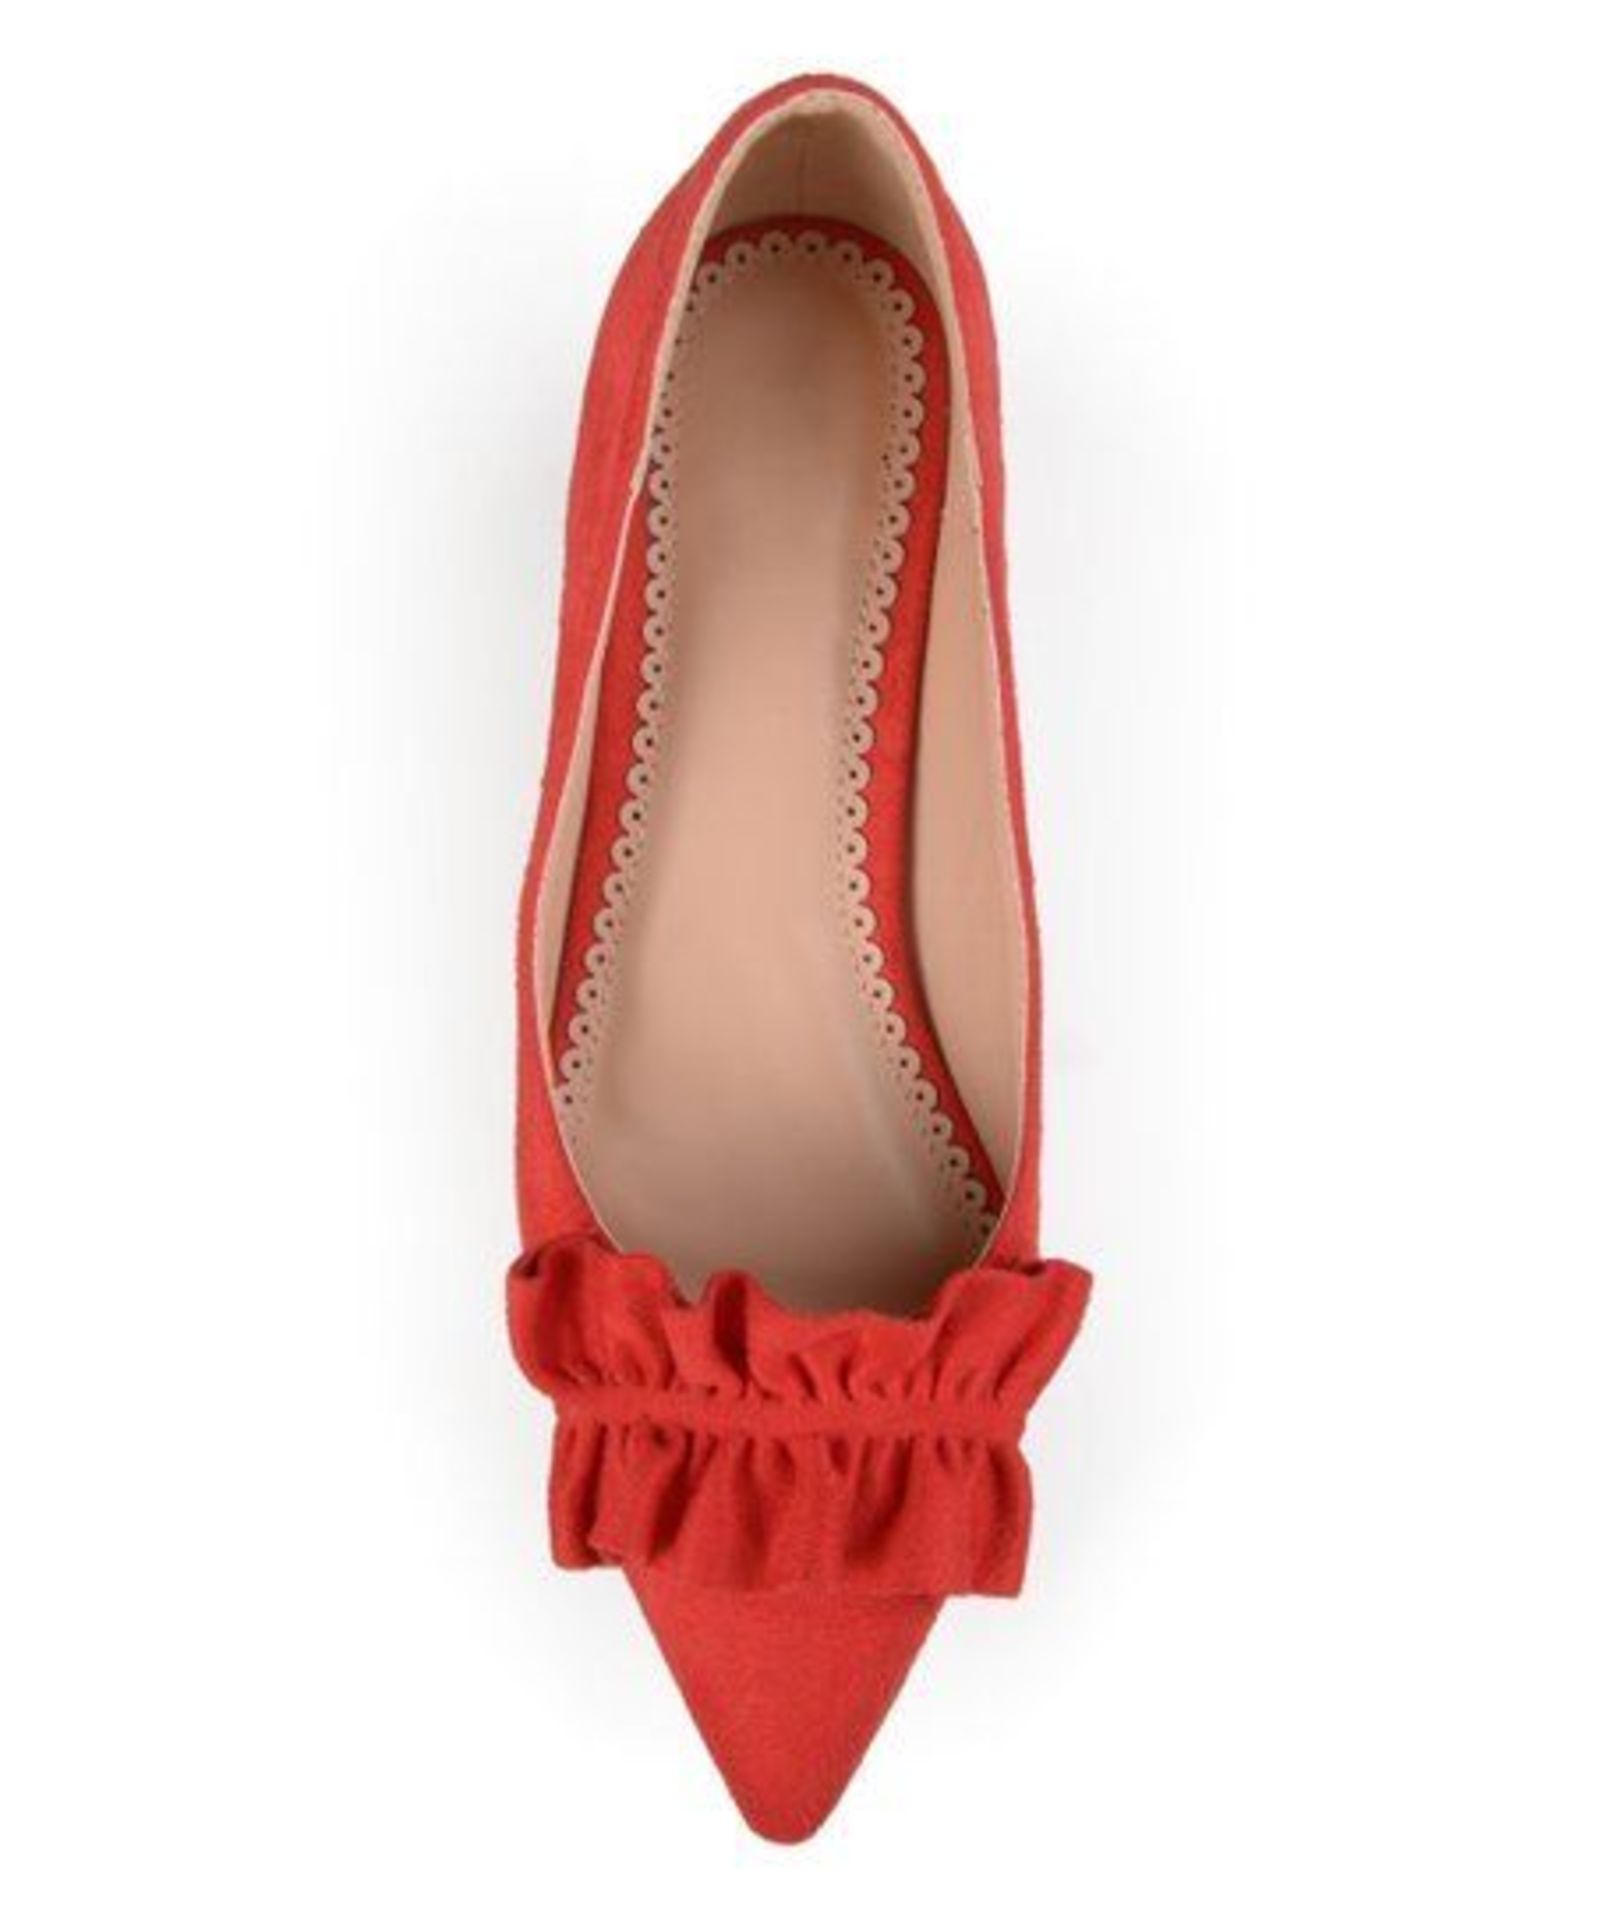 Bella Cora Red Shira Pump (Uk Size:5.5/Us Size:8) (New With Box) [Ref: 55196208-F-003] - Image 4 of 5